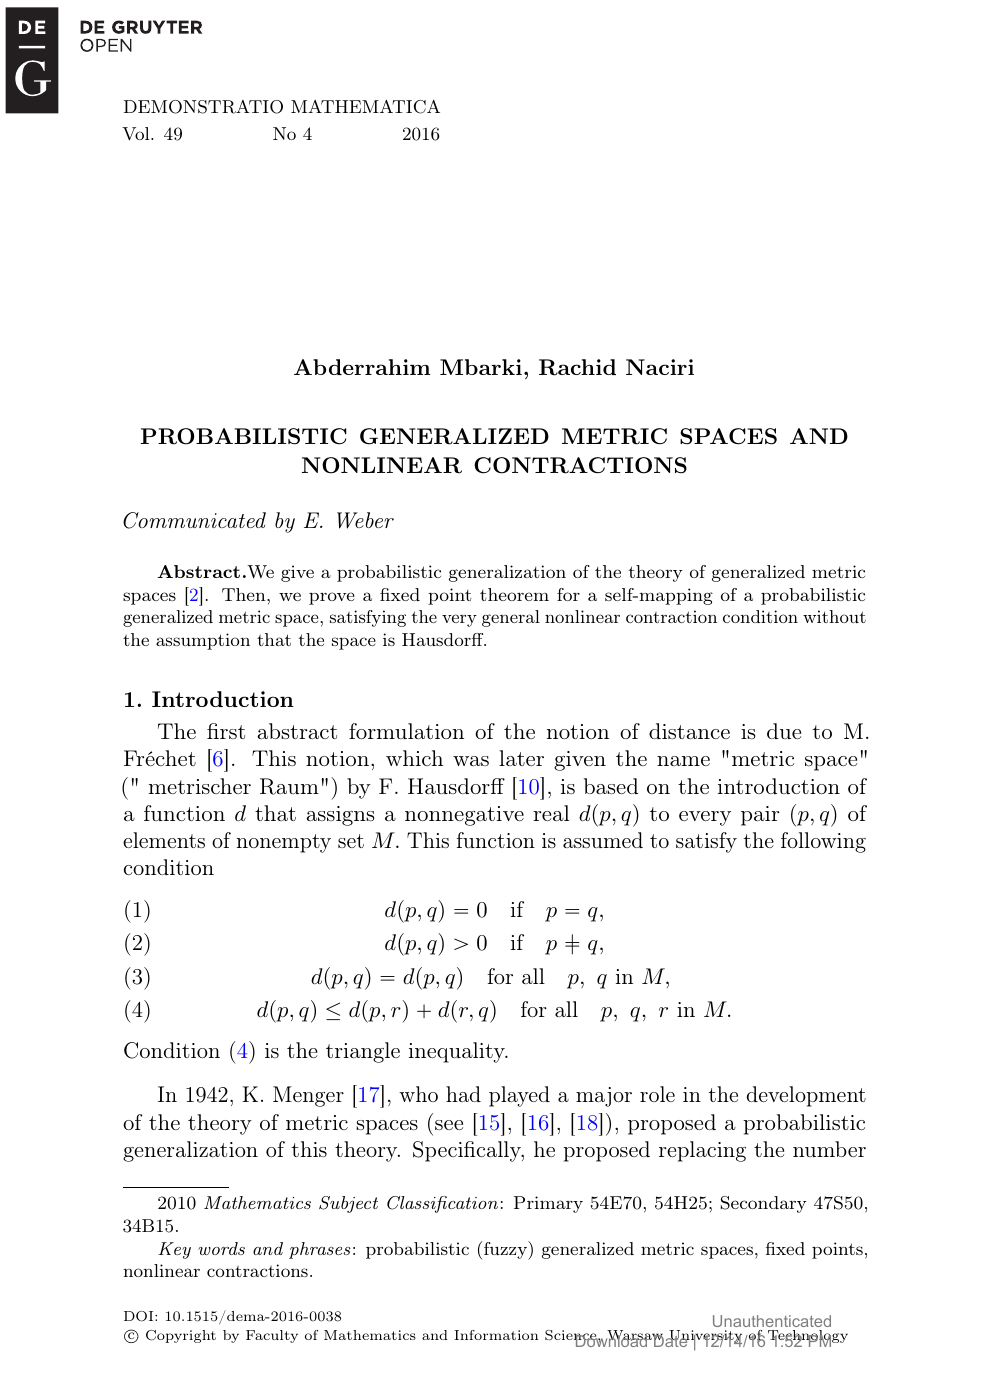 Probabilistic Generalized Metric Spaces And Nonlinear Contractions Topic Of Research Paper In Mathematics Download Scholarly Article Pdf And Read For Free On Cyberleninka Open Science Hub